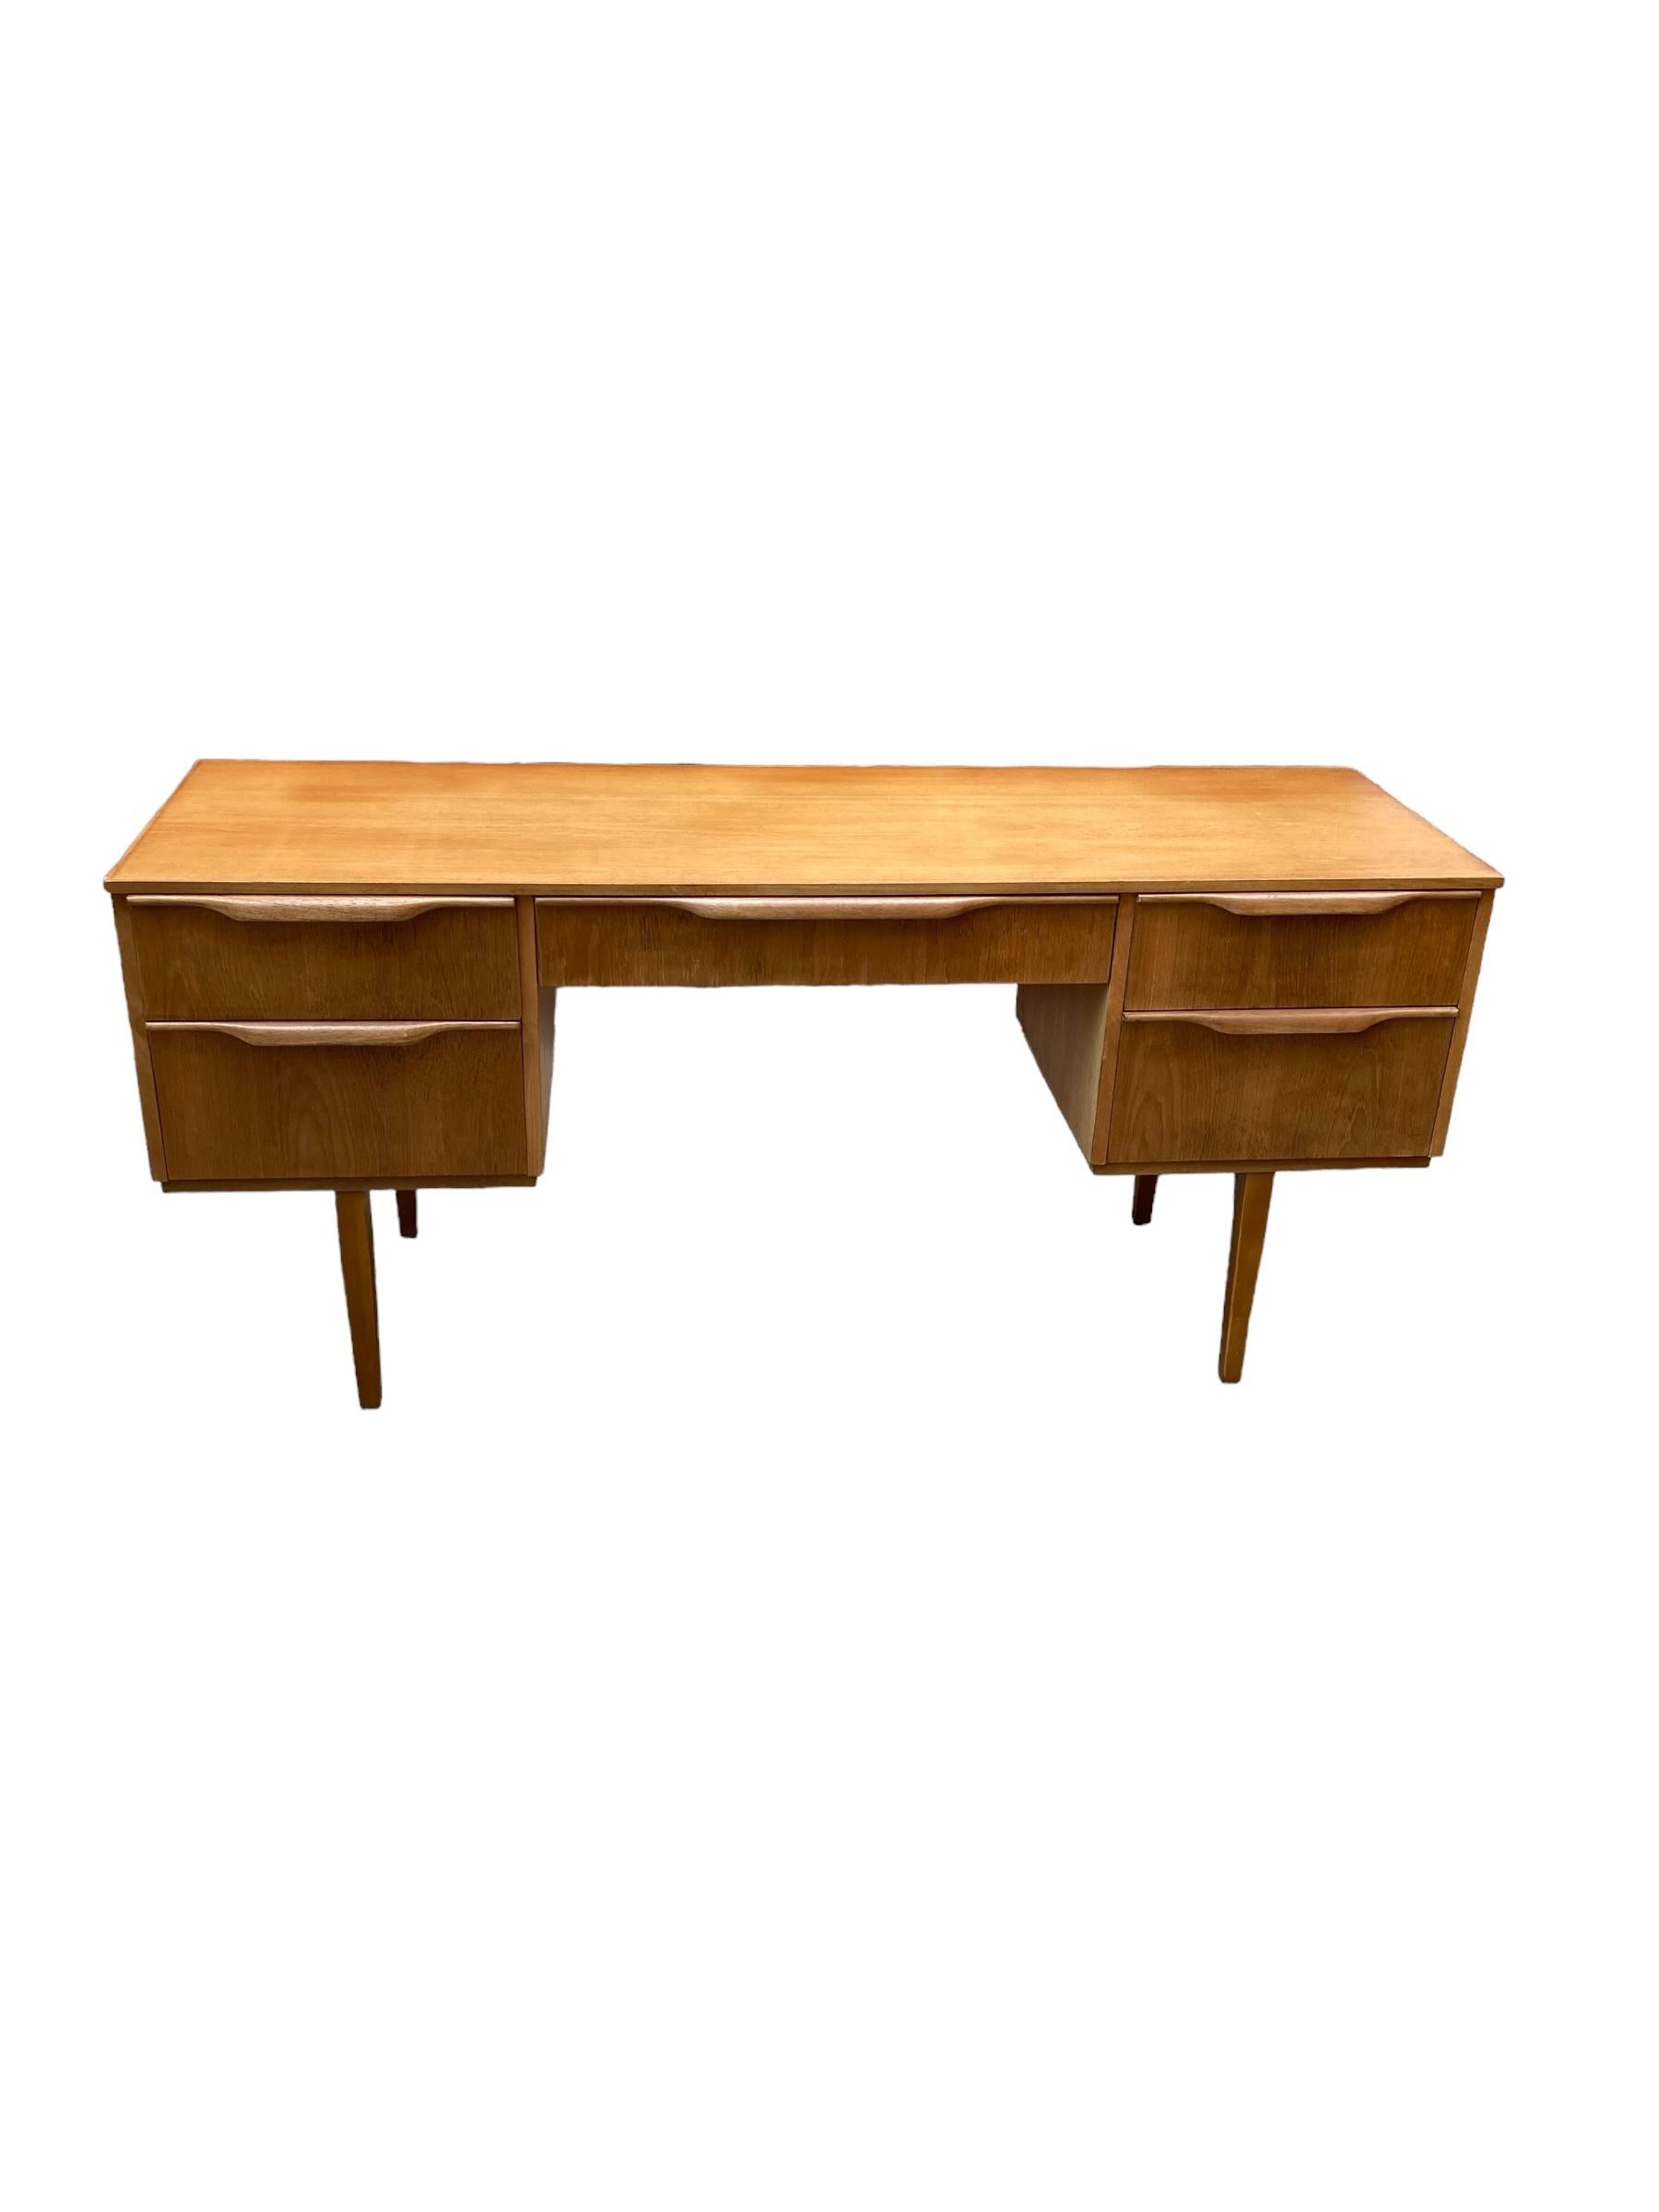 Mid Century Teak Five Drawer Austinsuite Low Desk/Dresser, Danish style on four Pin legs. This classic sleek design is both stylish and practical and fits into any theme of design
H: 68cm
L: 147cm
D: 48cmt
Desk knee hole Height: 55cm
Desk knee hole